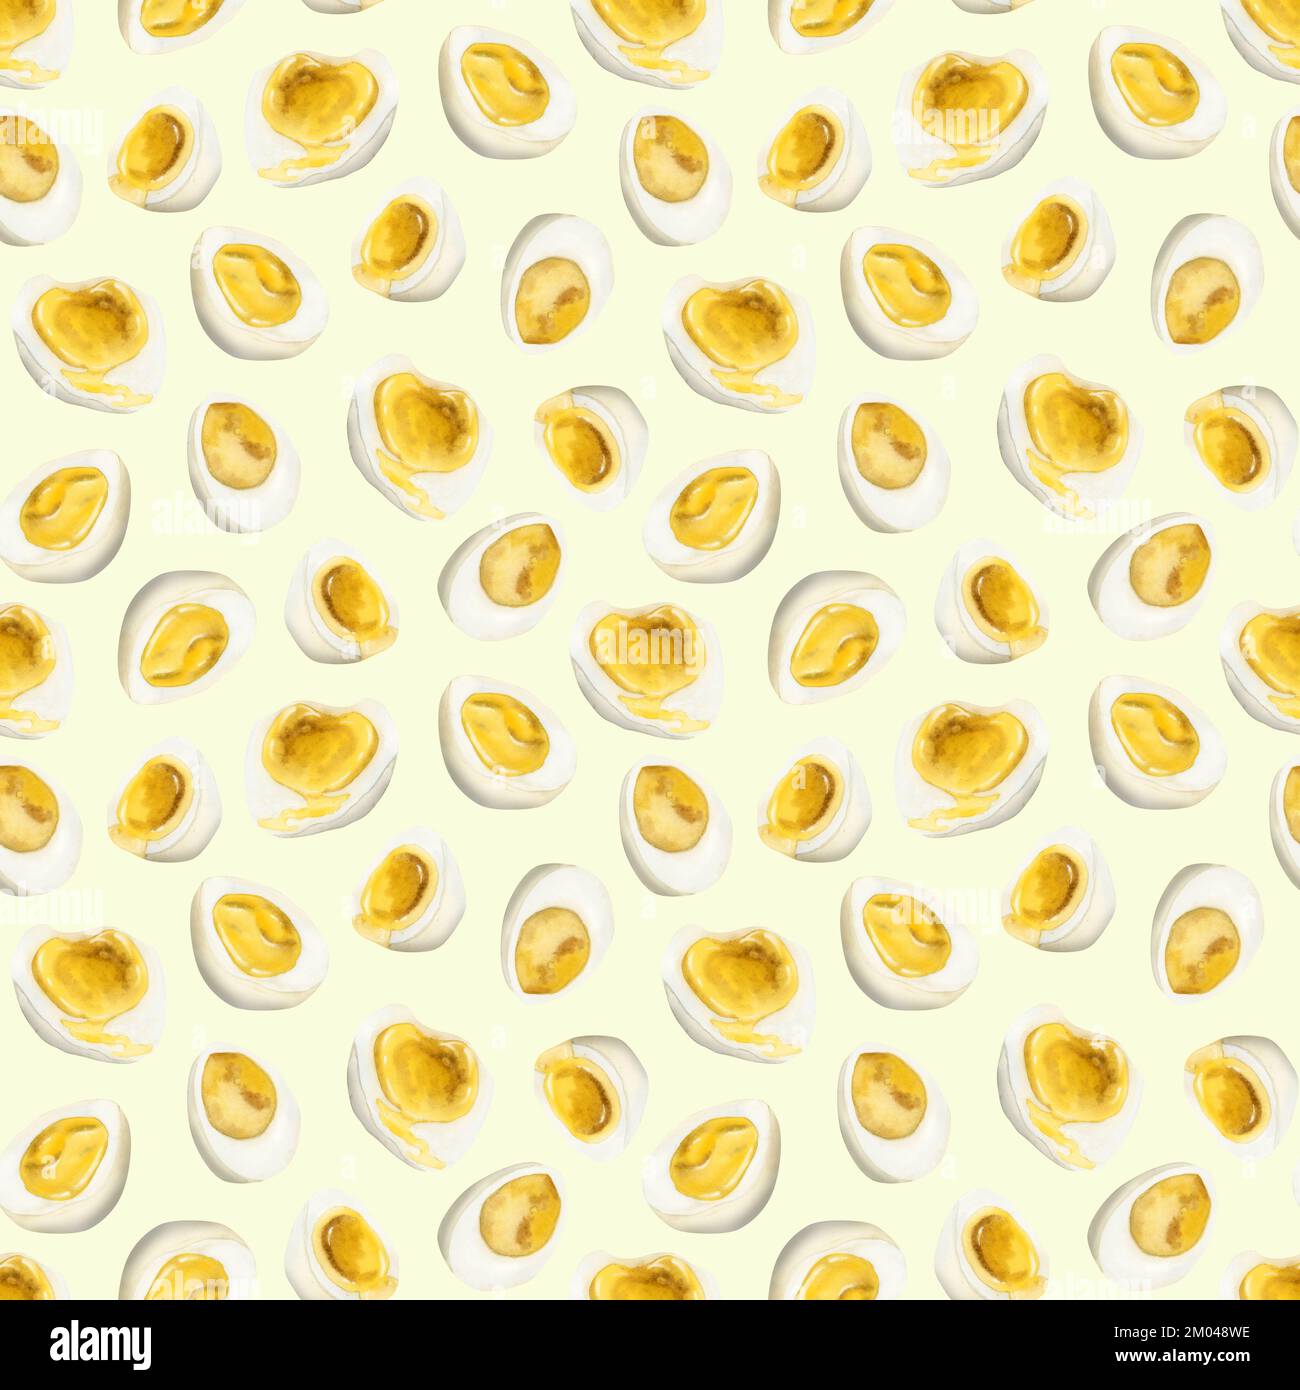 Watercolor pattern of boiled eggs with yellow yolk. Hand-drawn food illustration on light yellow background for restraunt and cafe menus, bouqlets Stock Photo